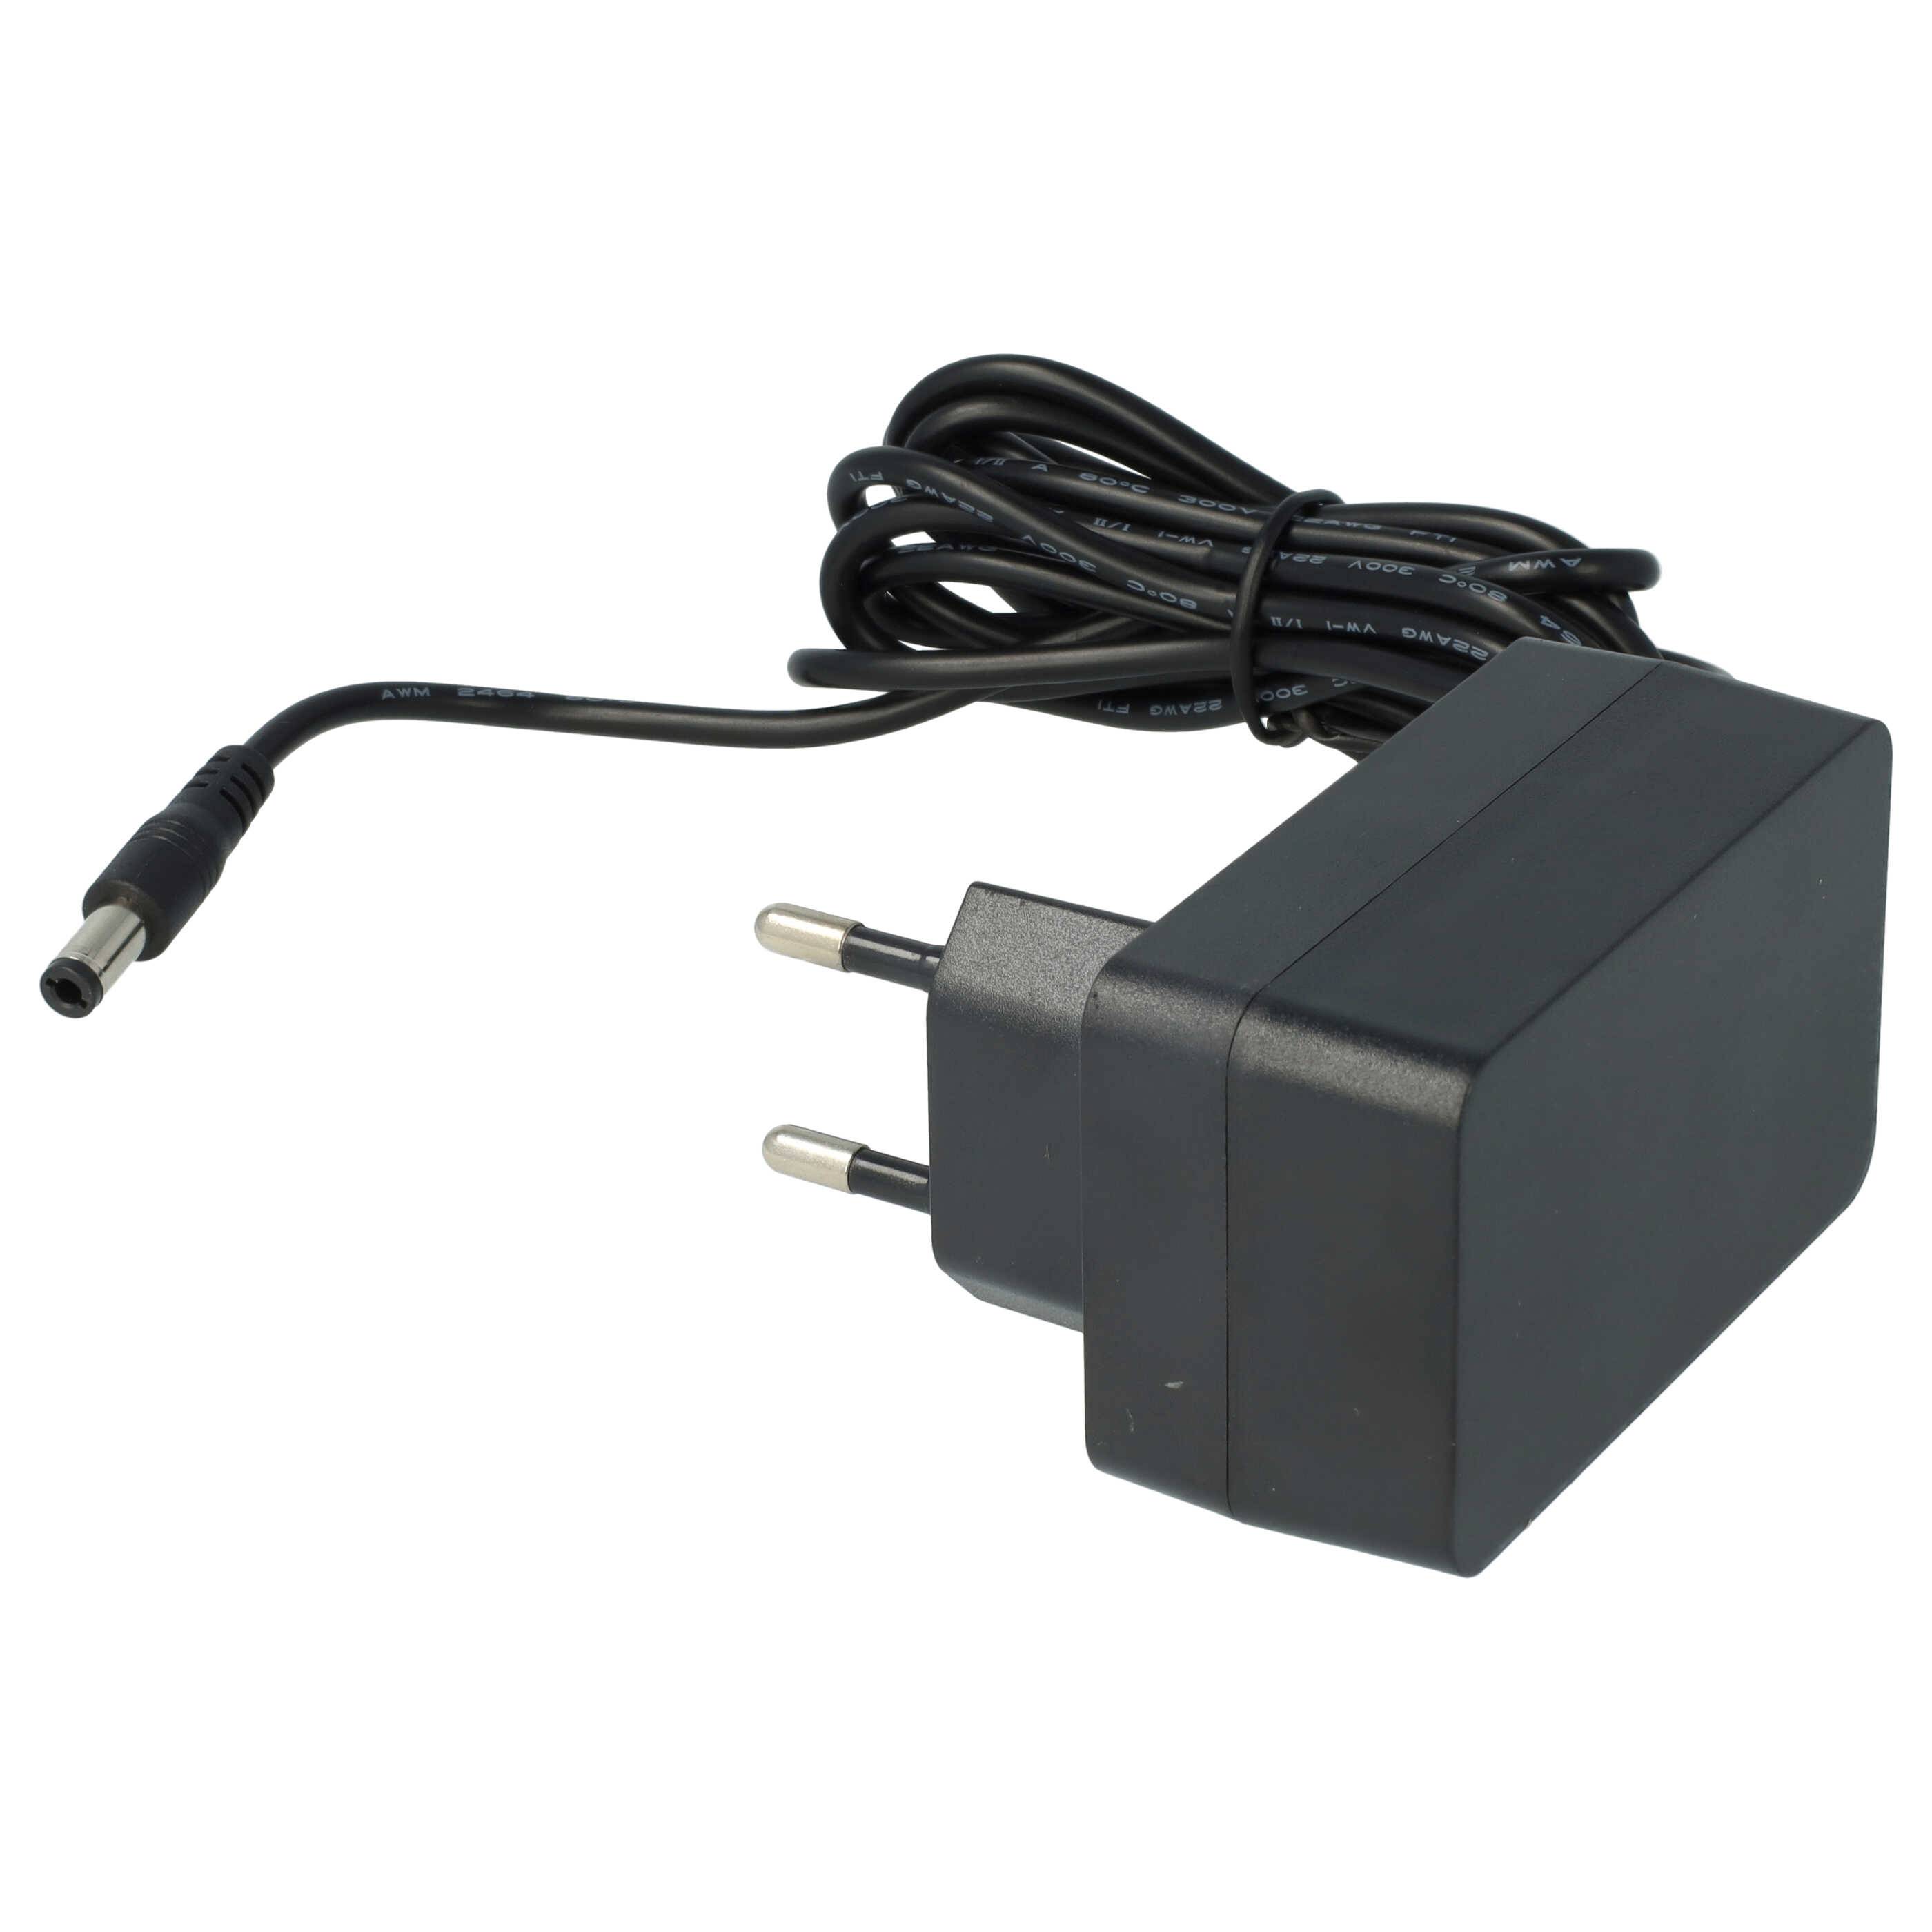 Mains Power Adapter suitable for Ecovacs Deebot D83 Robot Vacuum Cleaner Charging Station - 170 cm long Cable